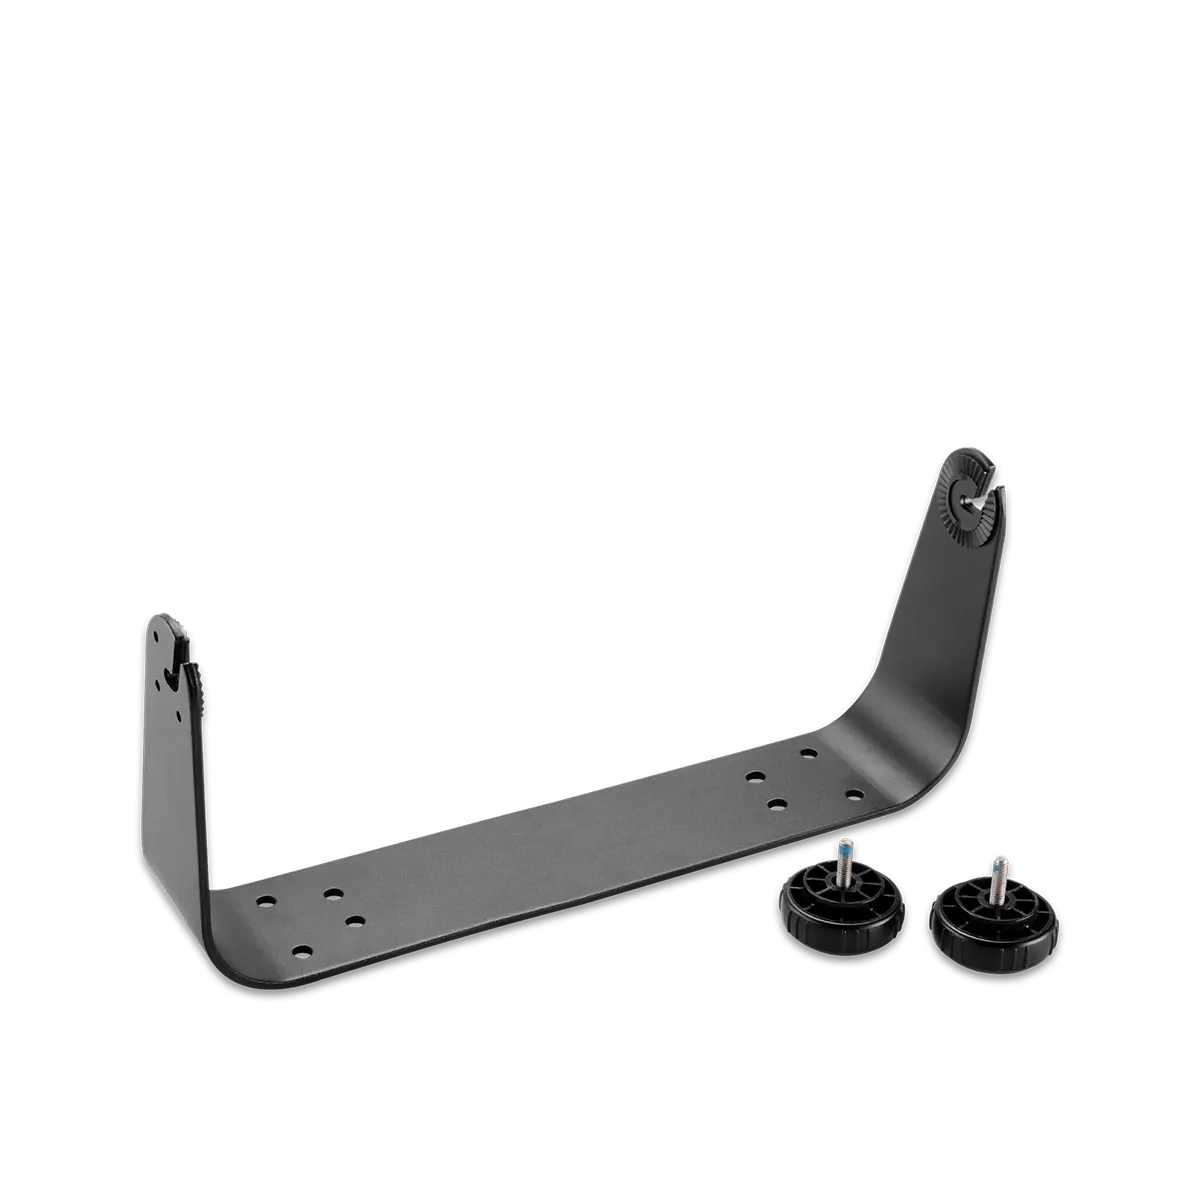 Garmin Bail Mount with Knobs for GPSMAP 7416